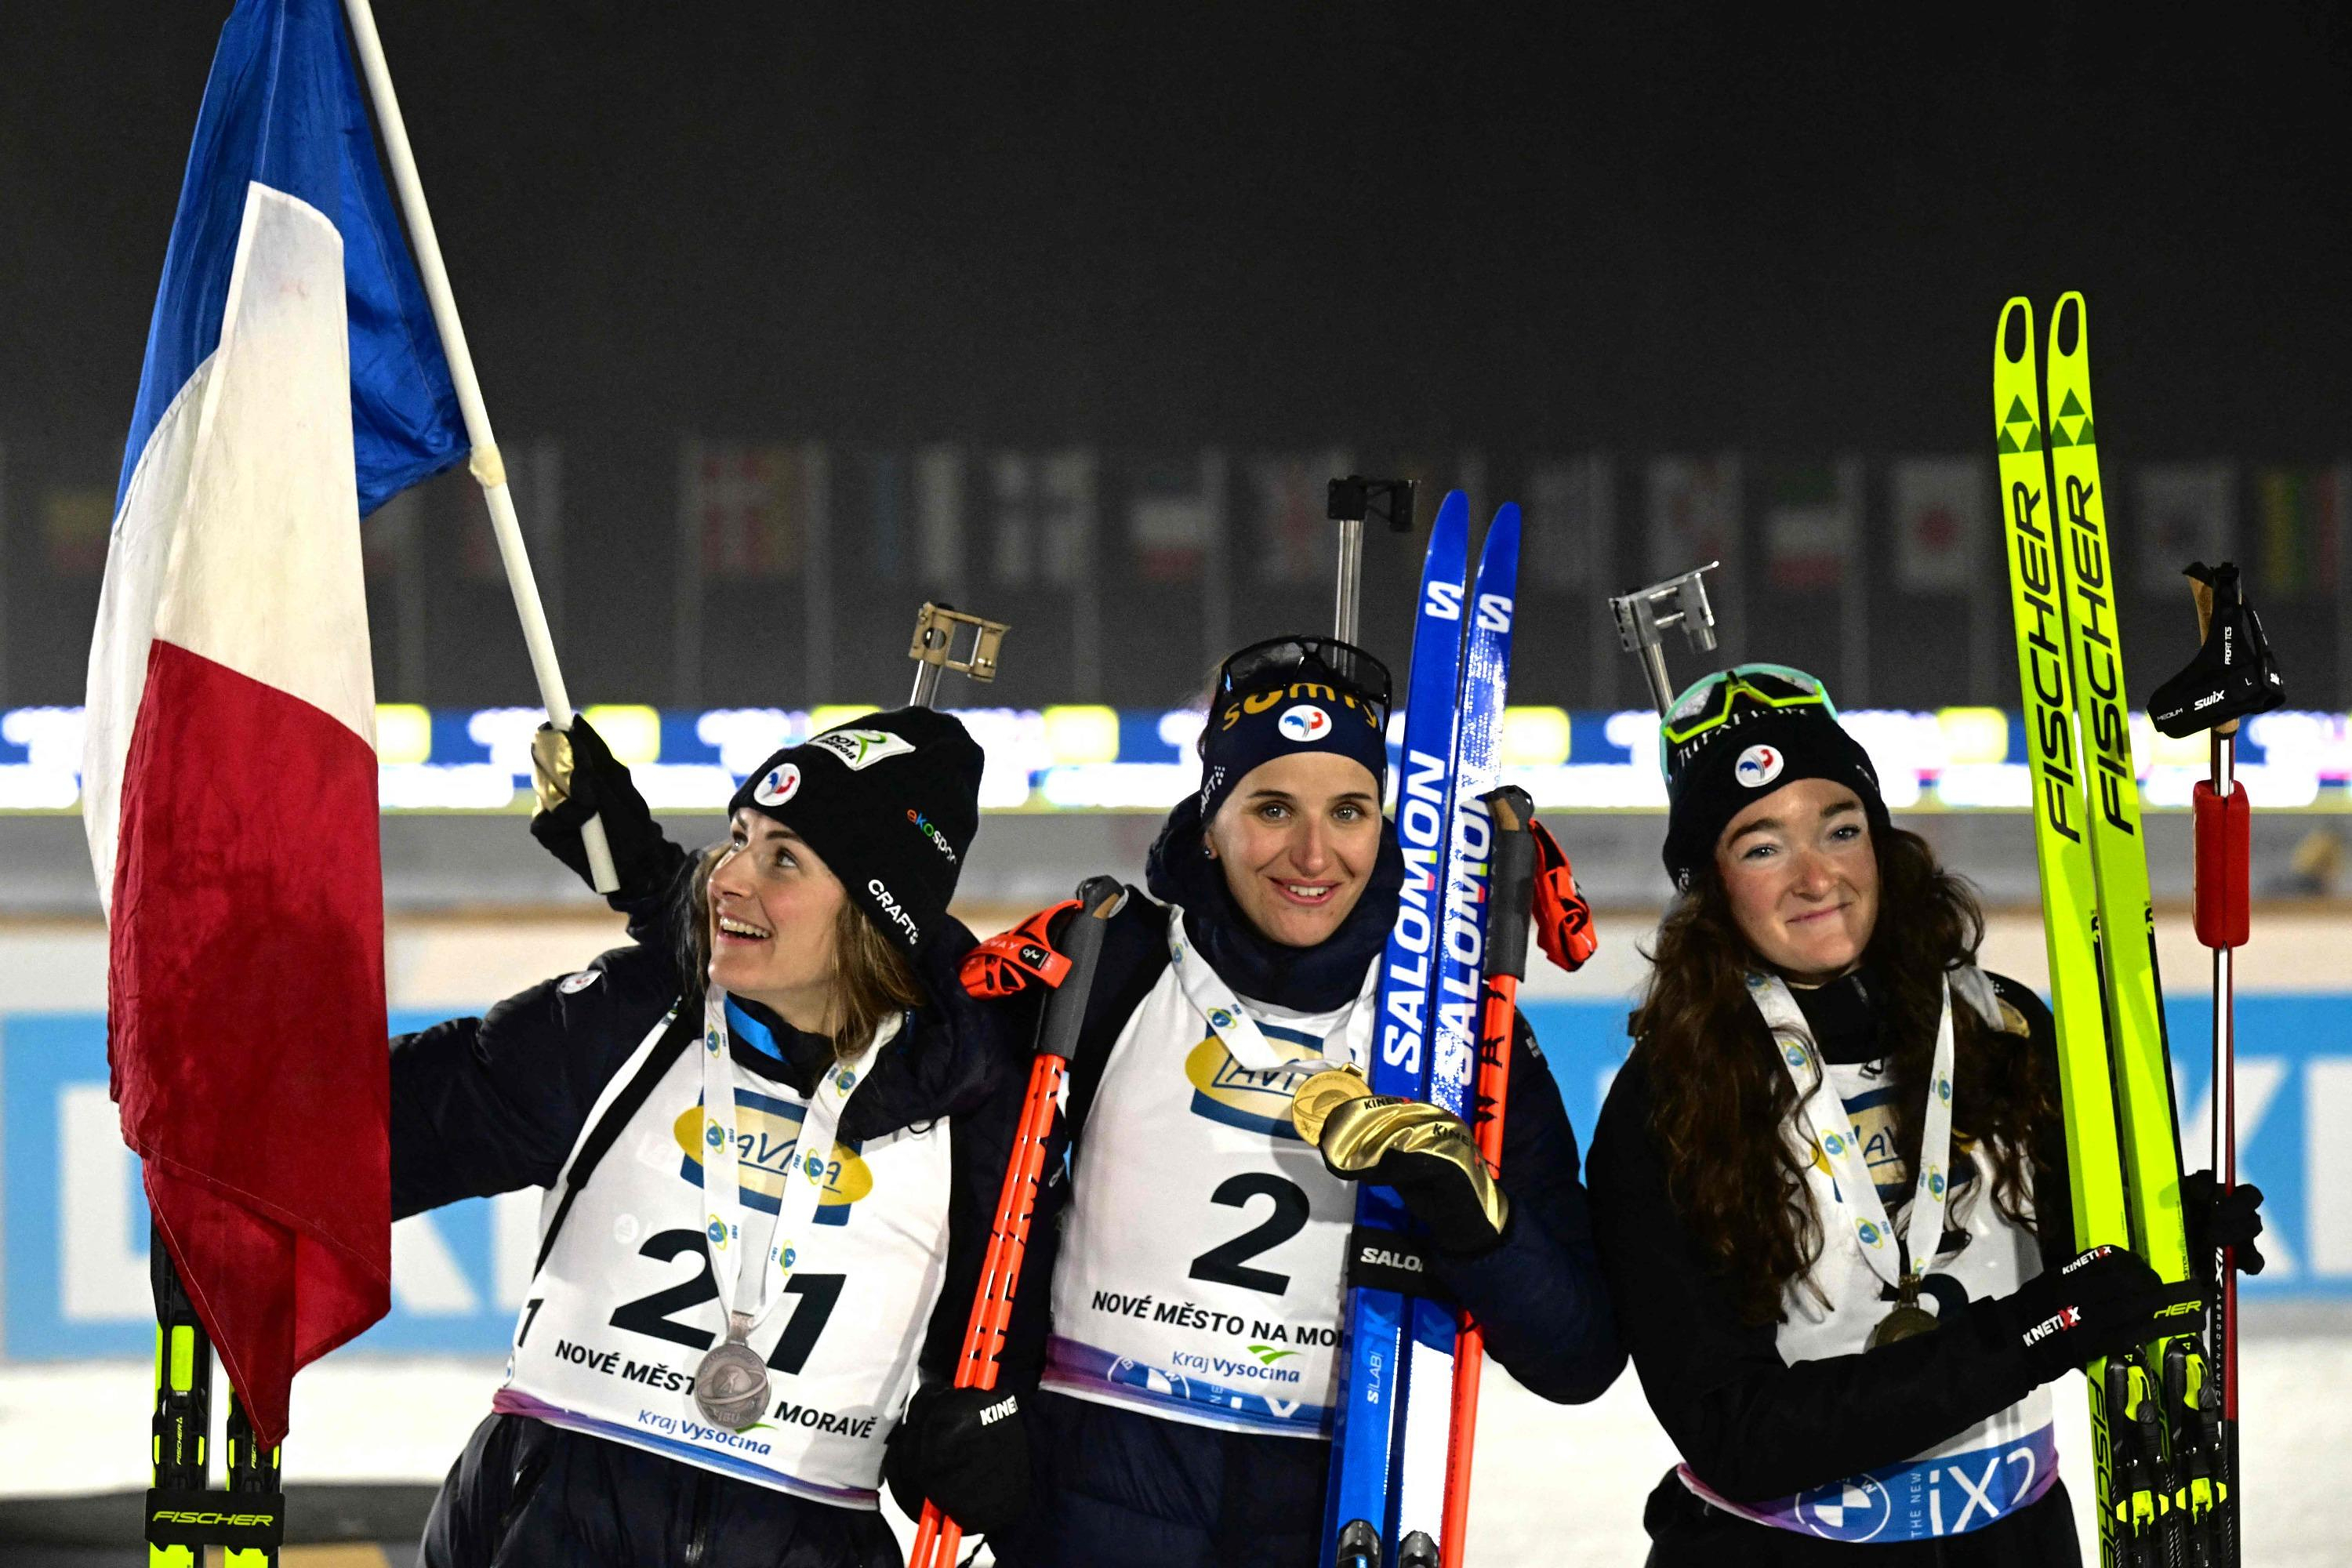 Biathlon Worlds: Julia Simon crowned in the sprint, historic hat-trick for Les Bleues